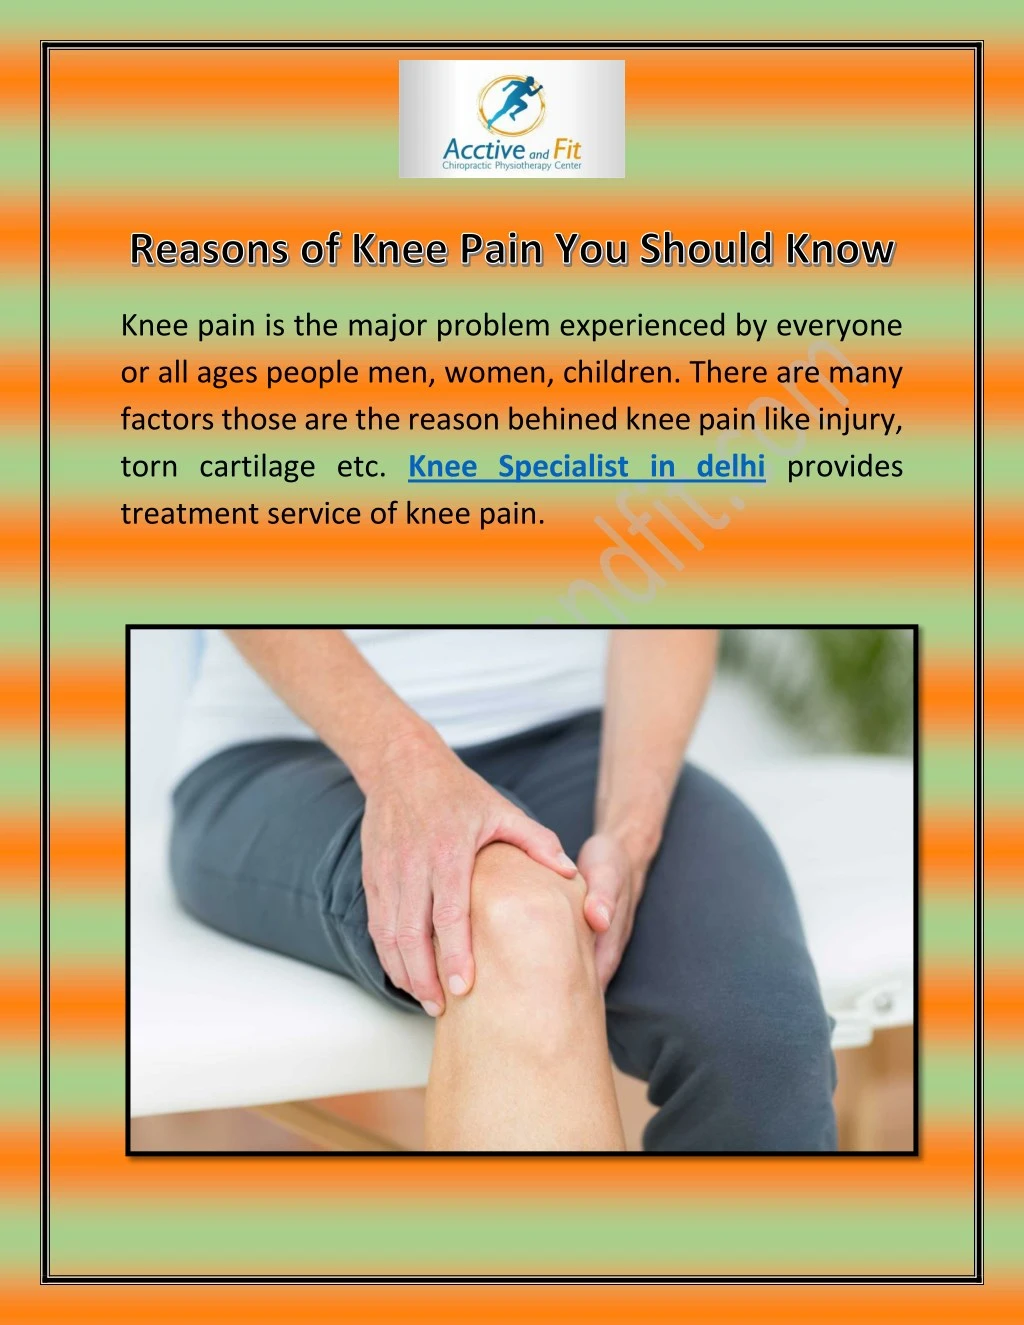 knee pain is the major problem experienced